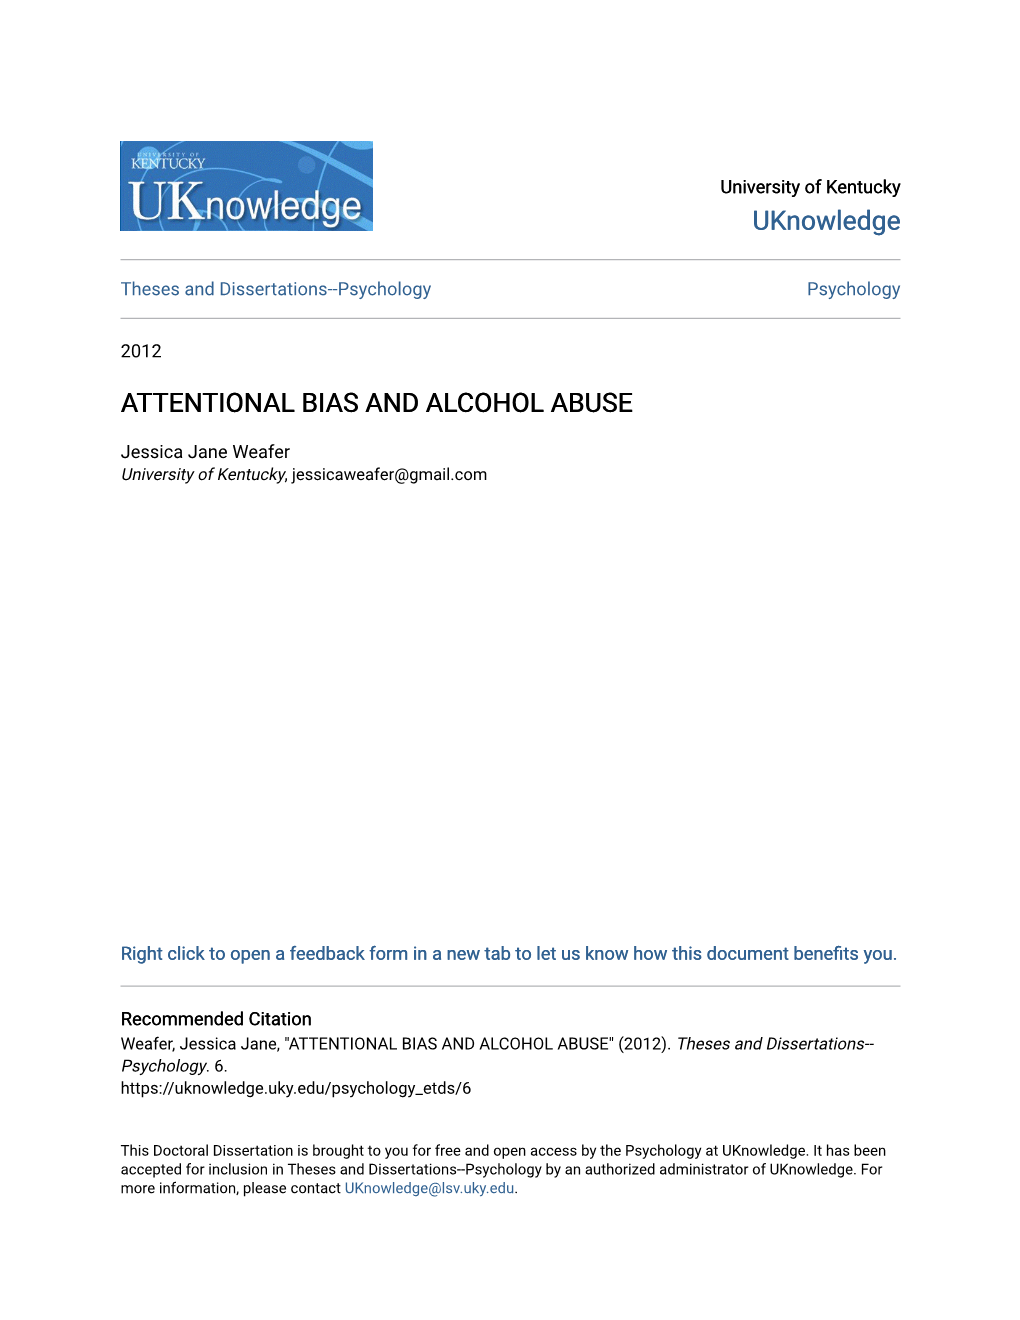 Attentional Bias and Alcohol Abuse